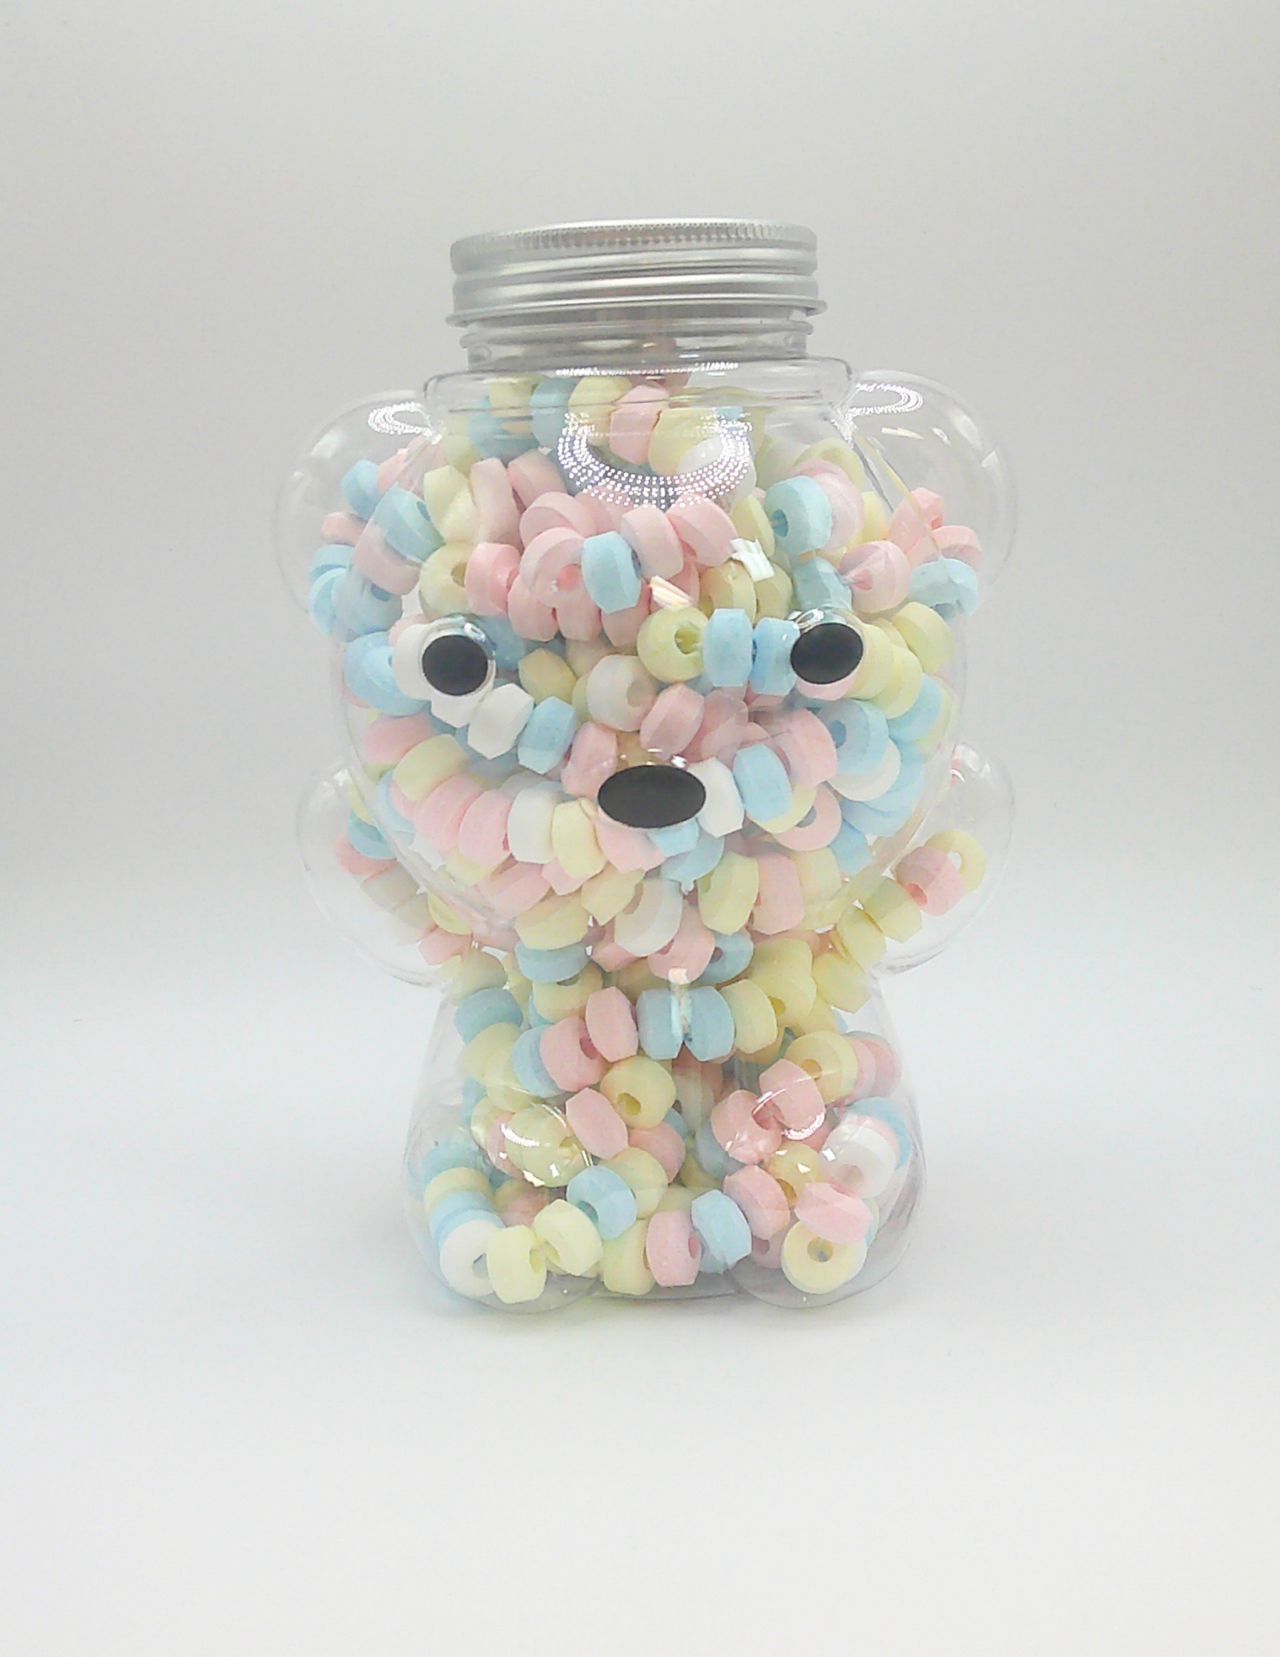 Jar of Candy Necklaces